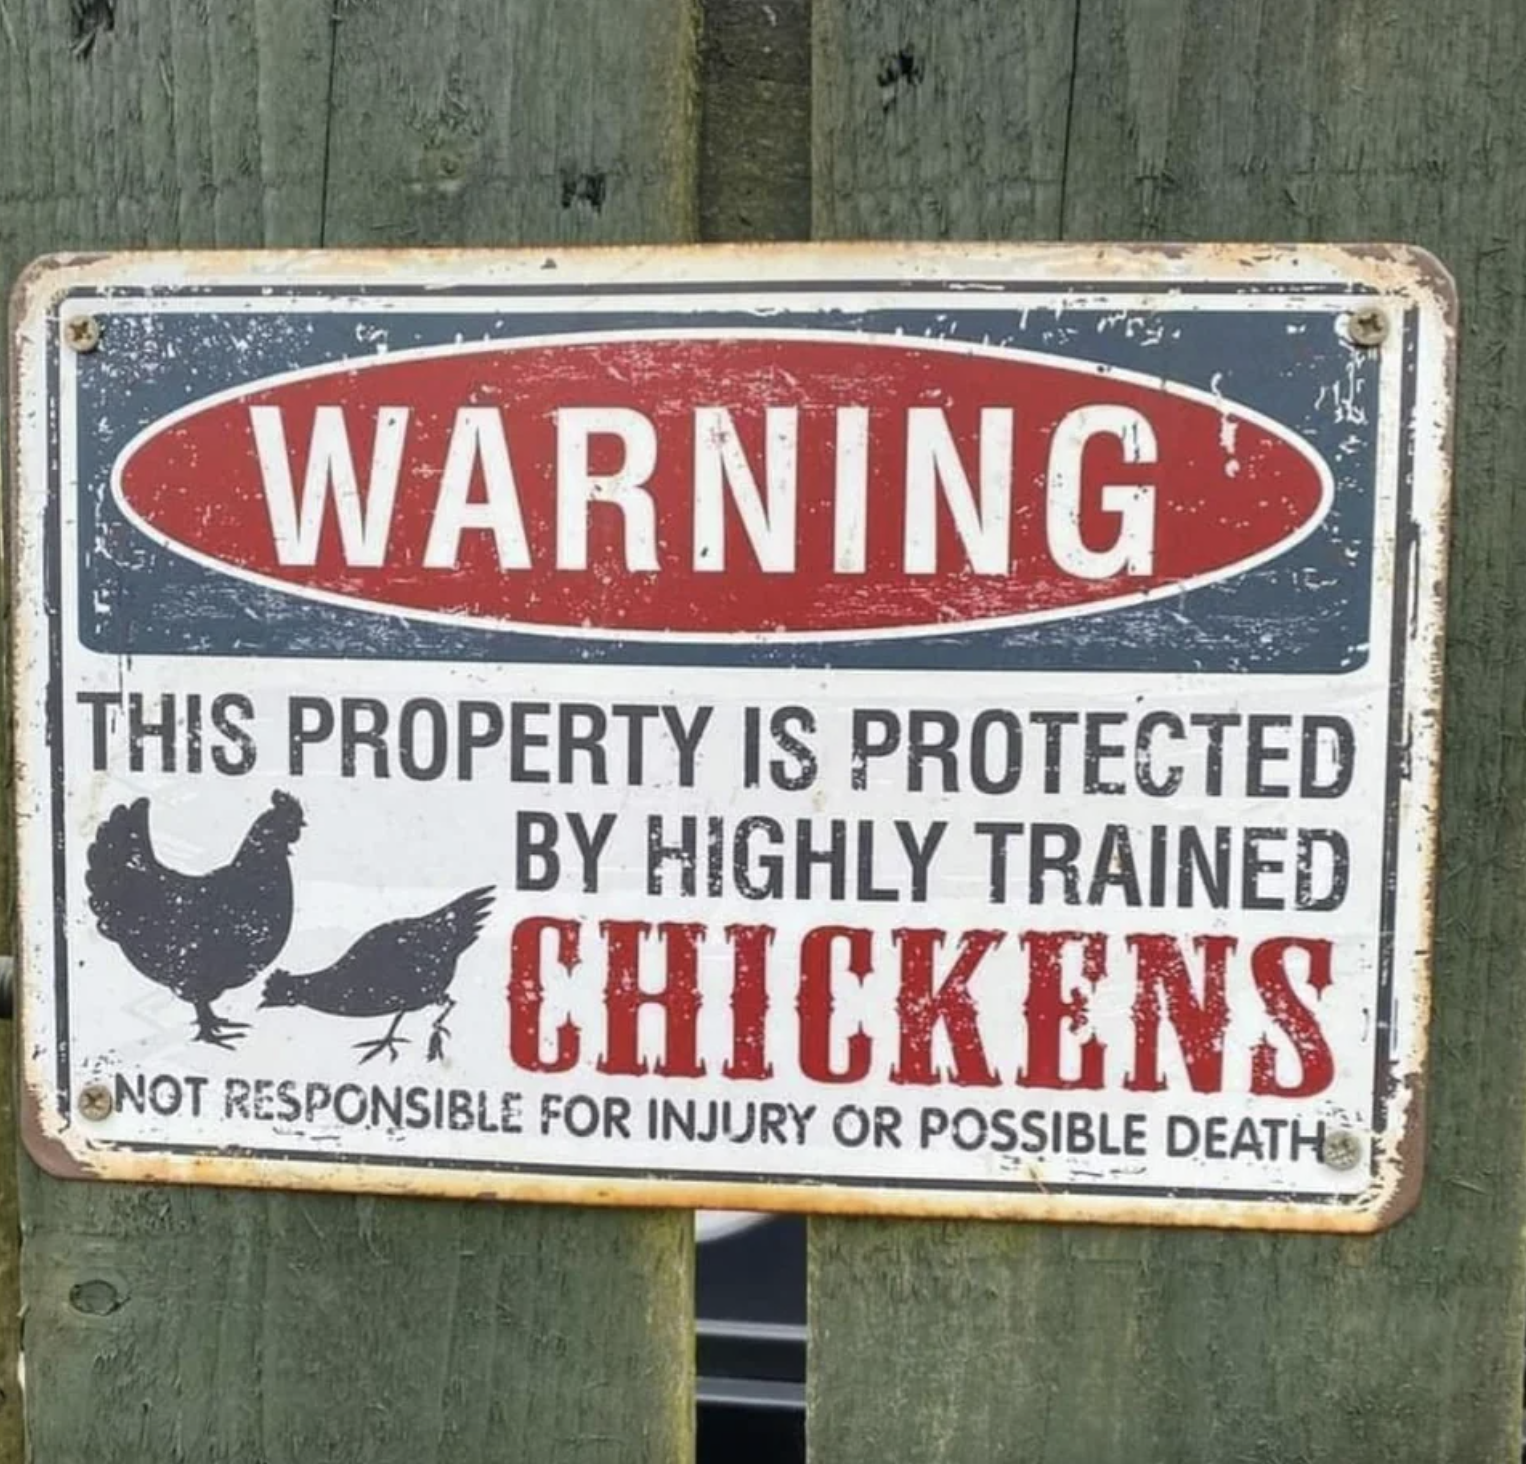 warning this property is protected by highly trained chickens